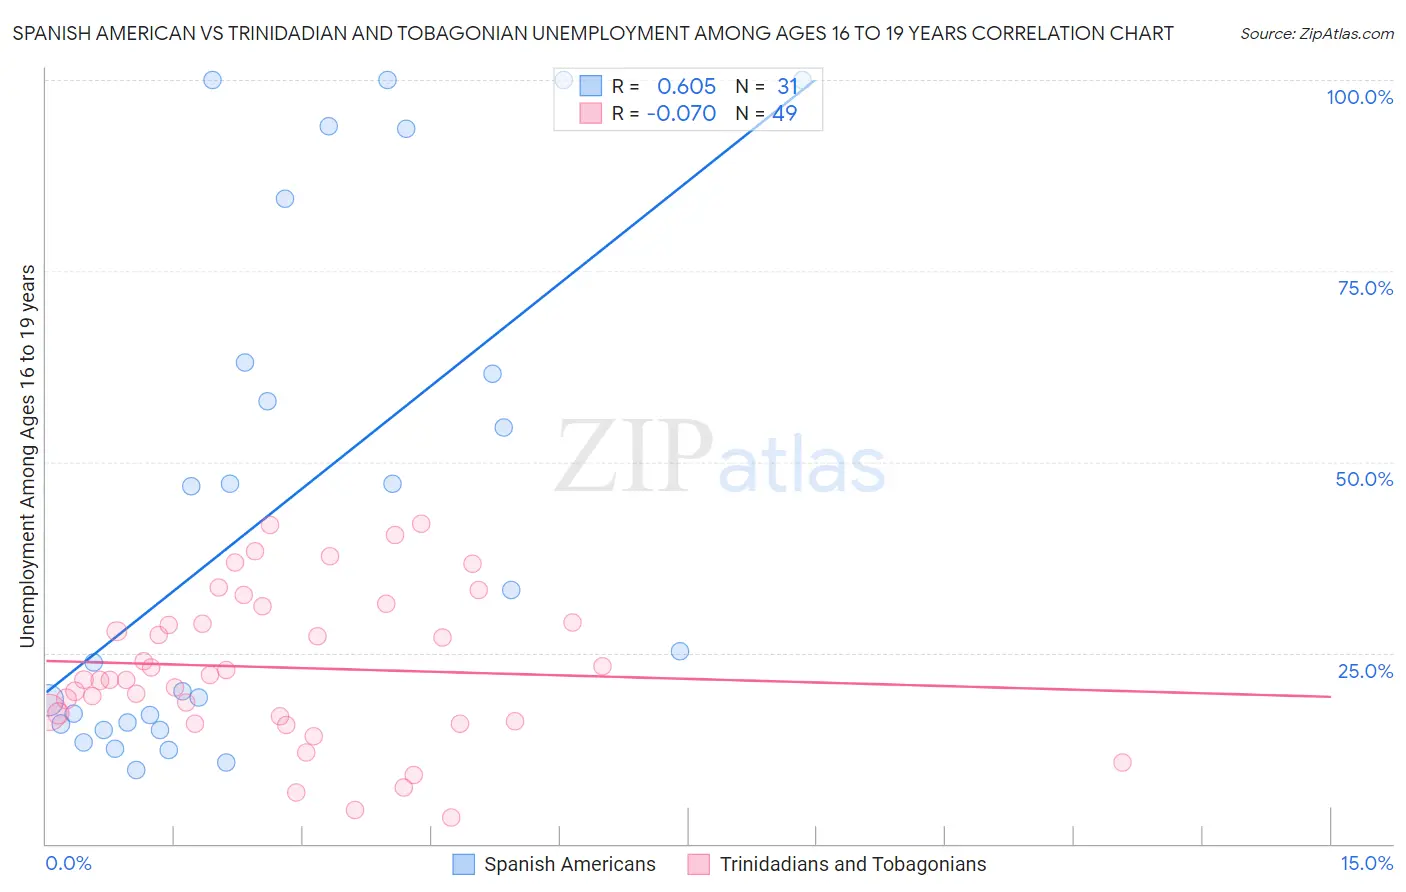 Spanish American vs Trinidadian and Tobagonian Unemployment Among Ages 16 to 19 years